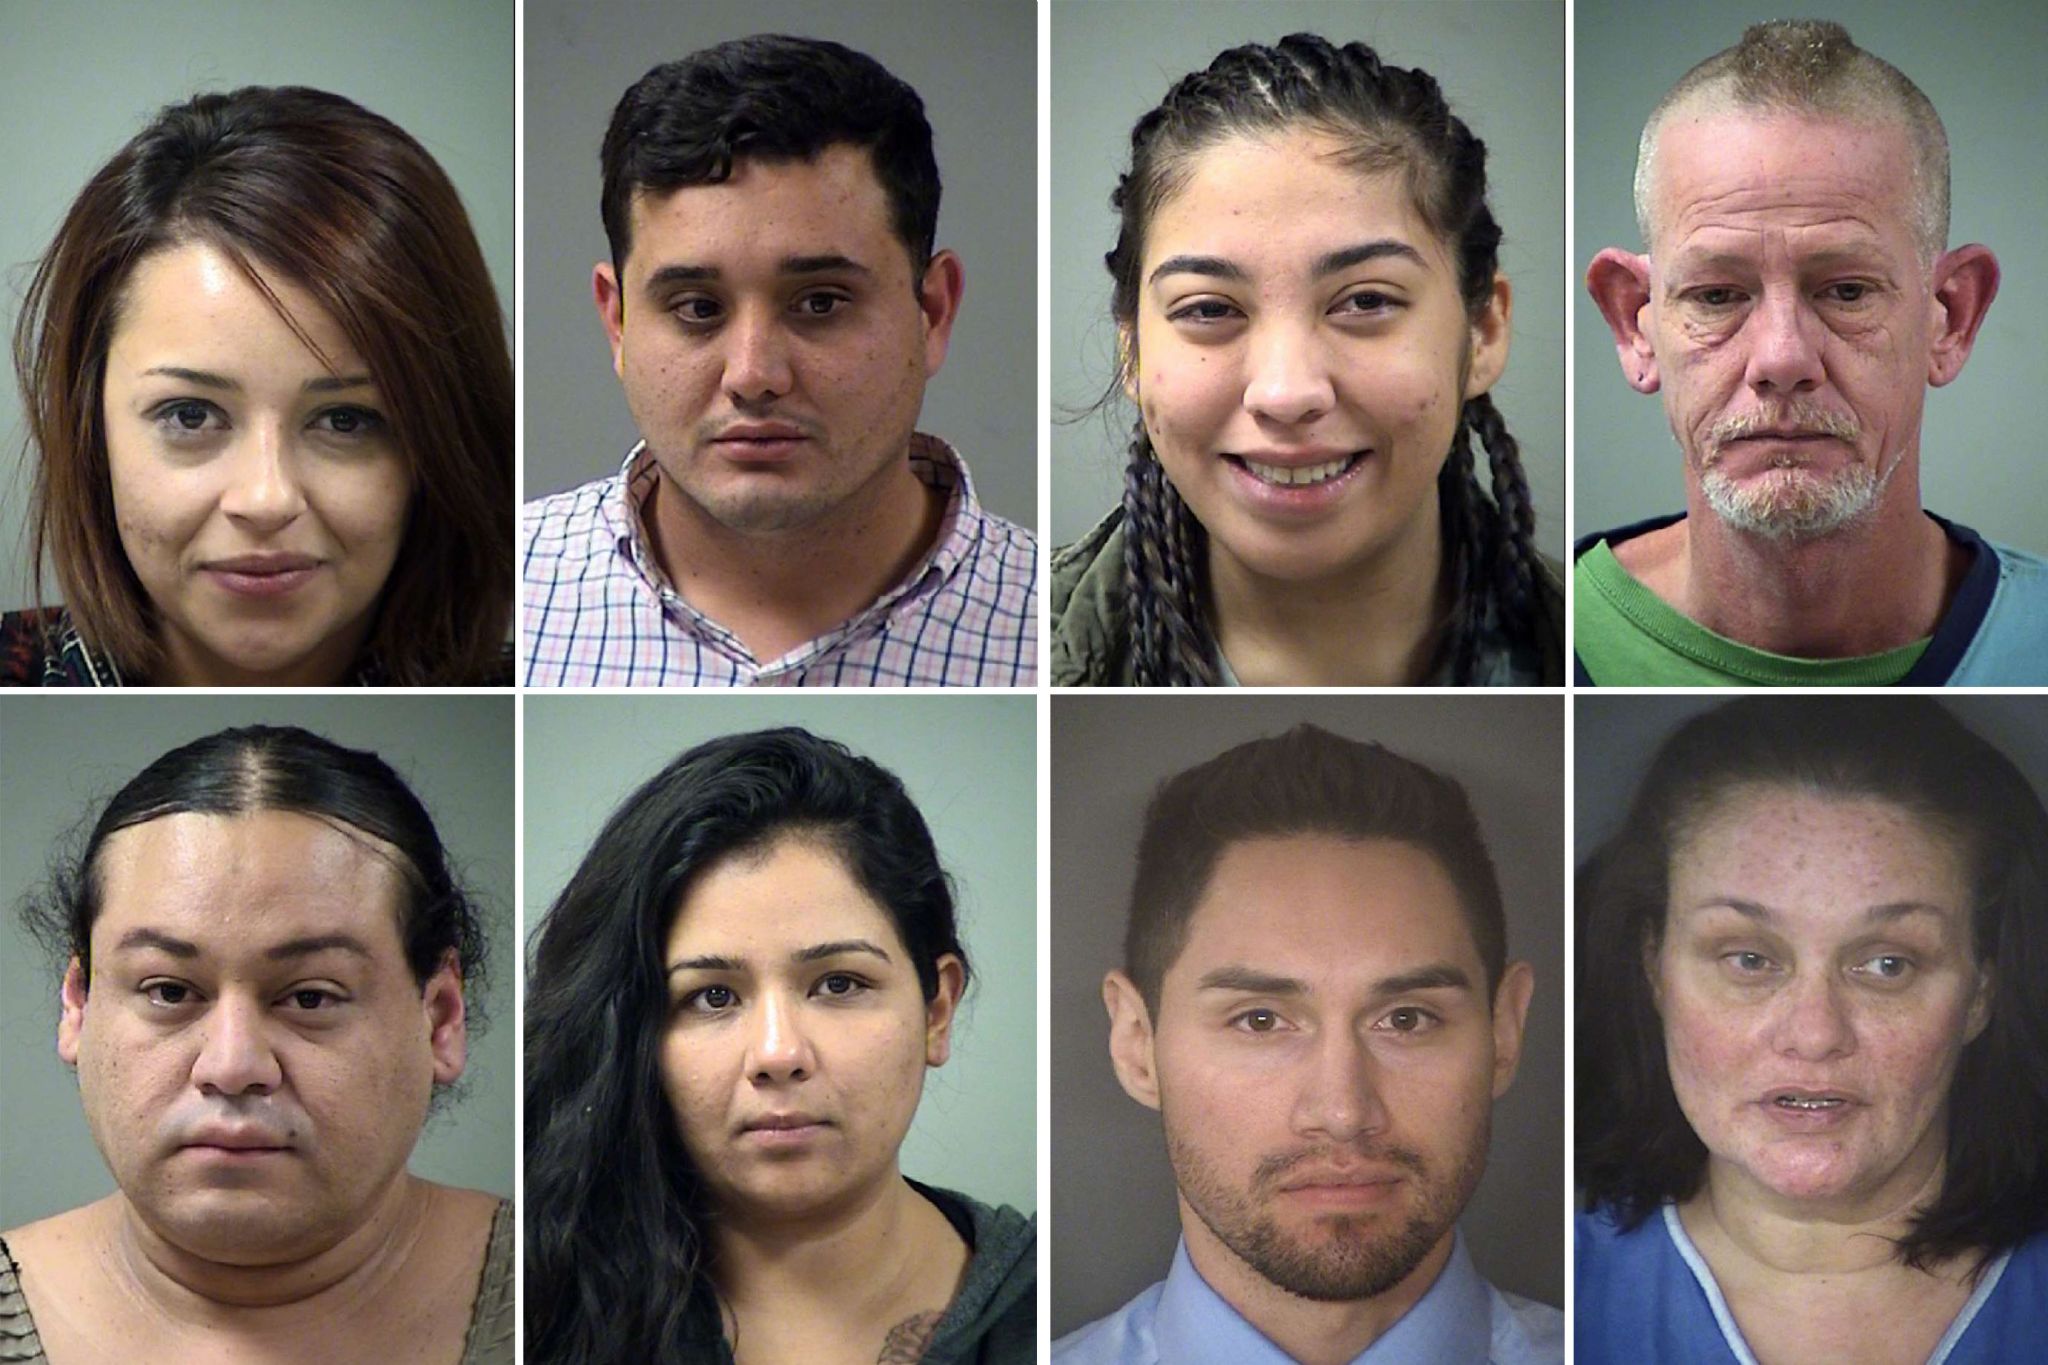 Records 58 People Arrested On Felony Drunken Driving Charges In November